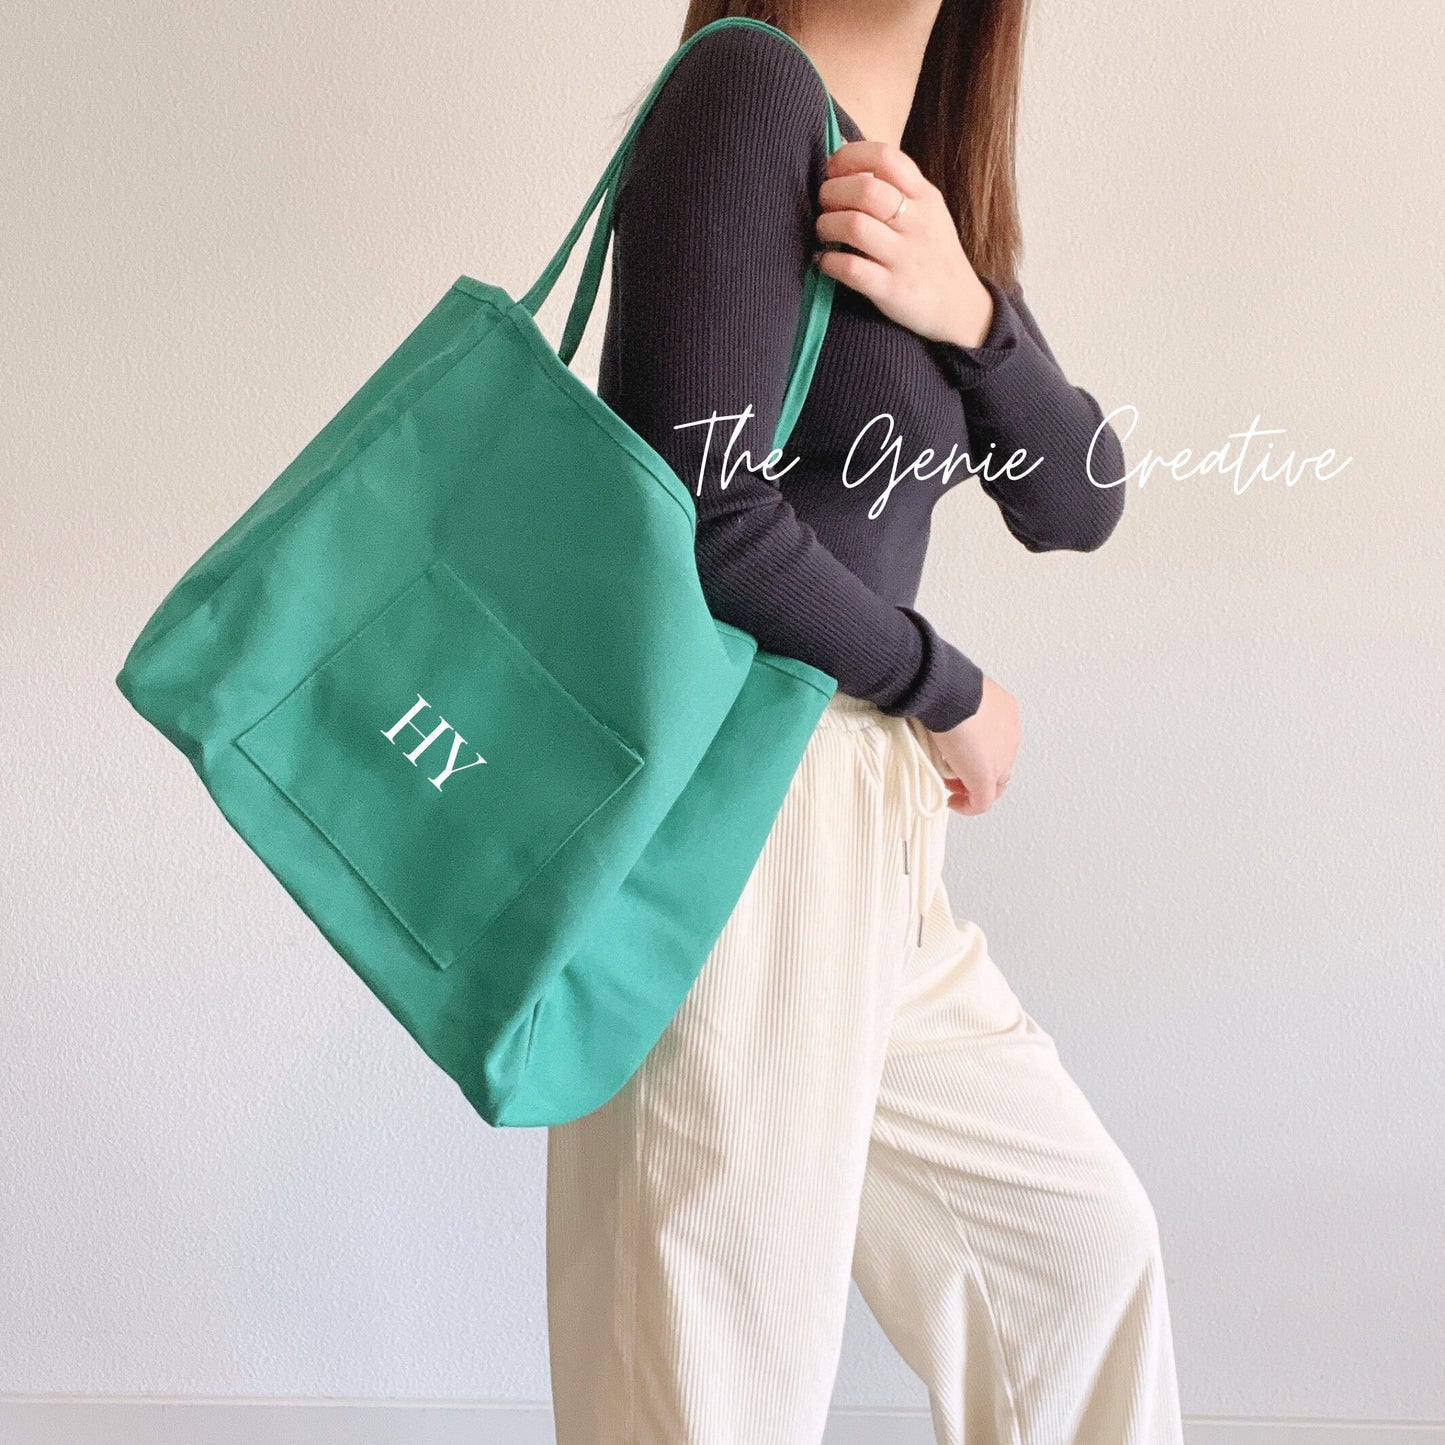 Personalized Name Tote Bags Large